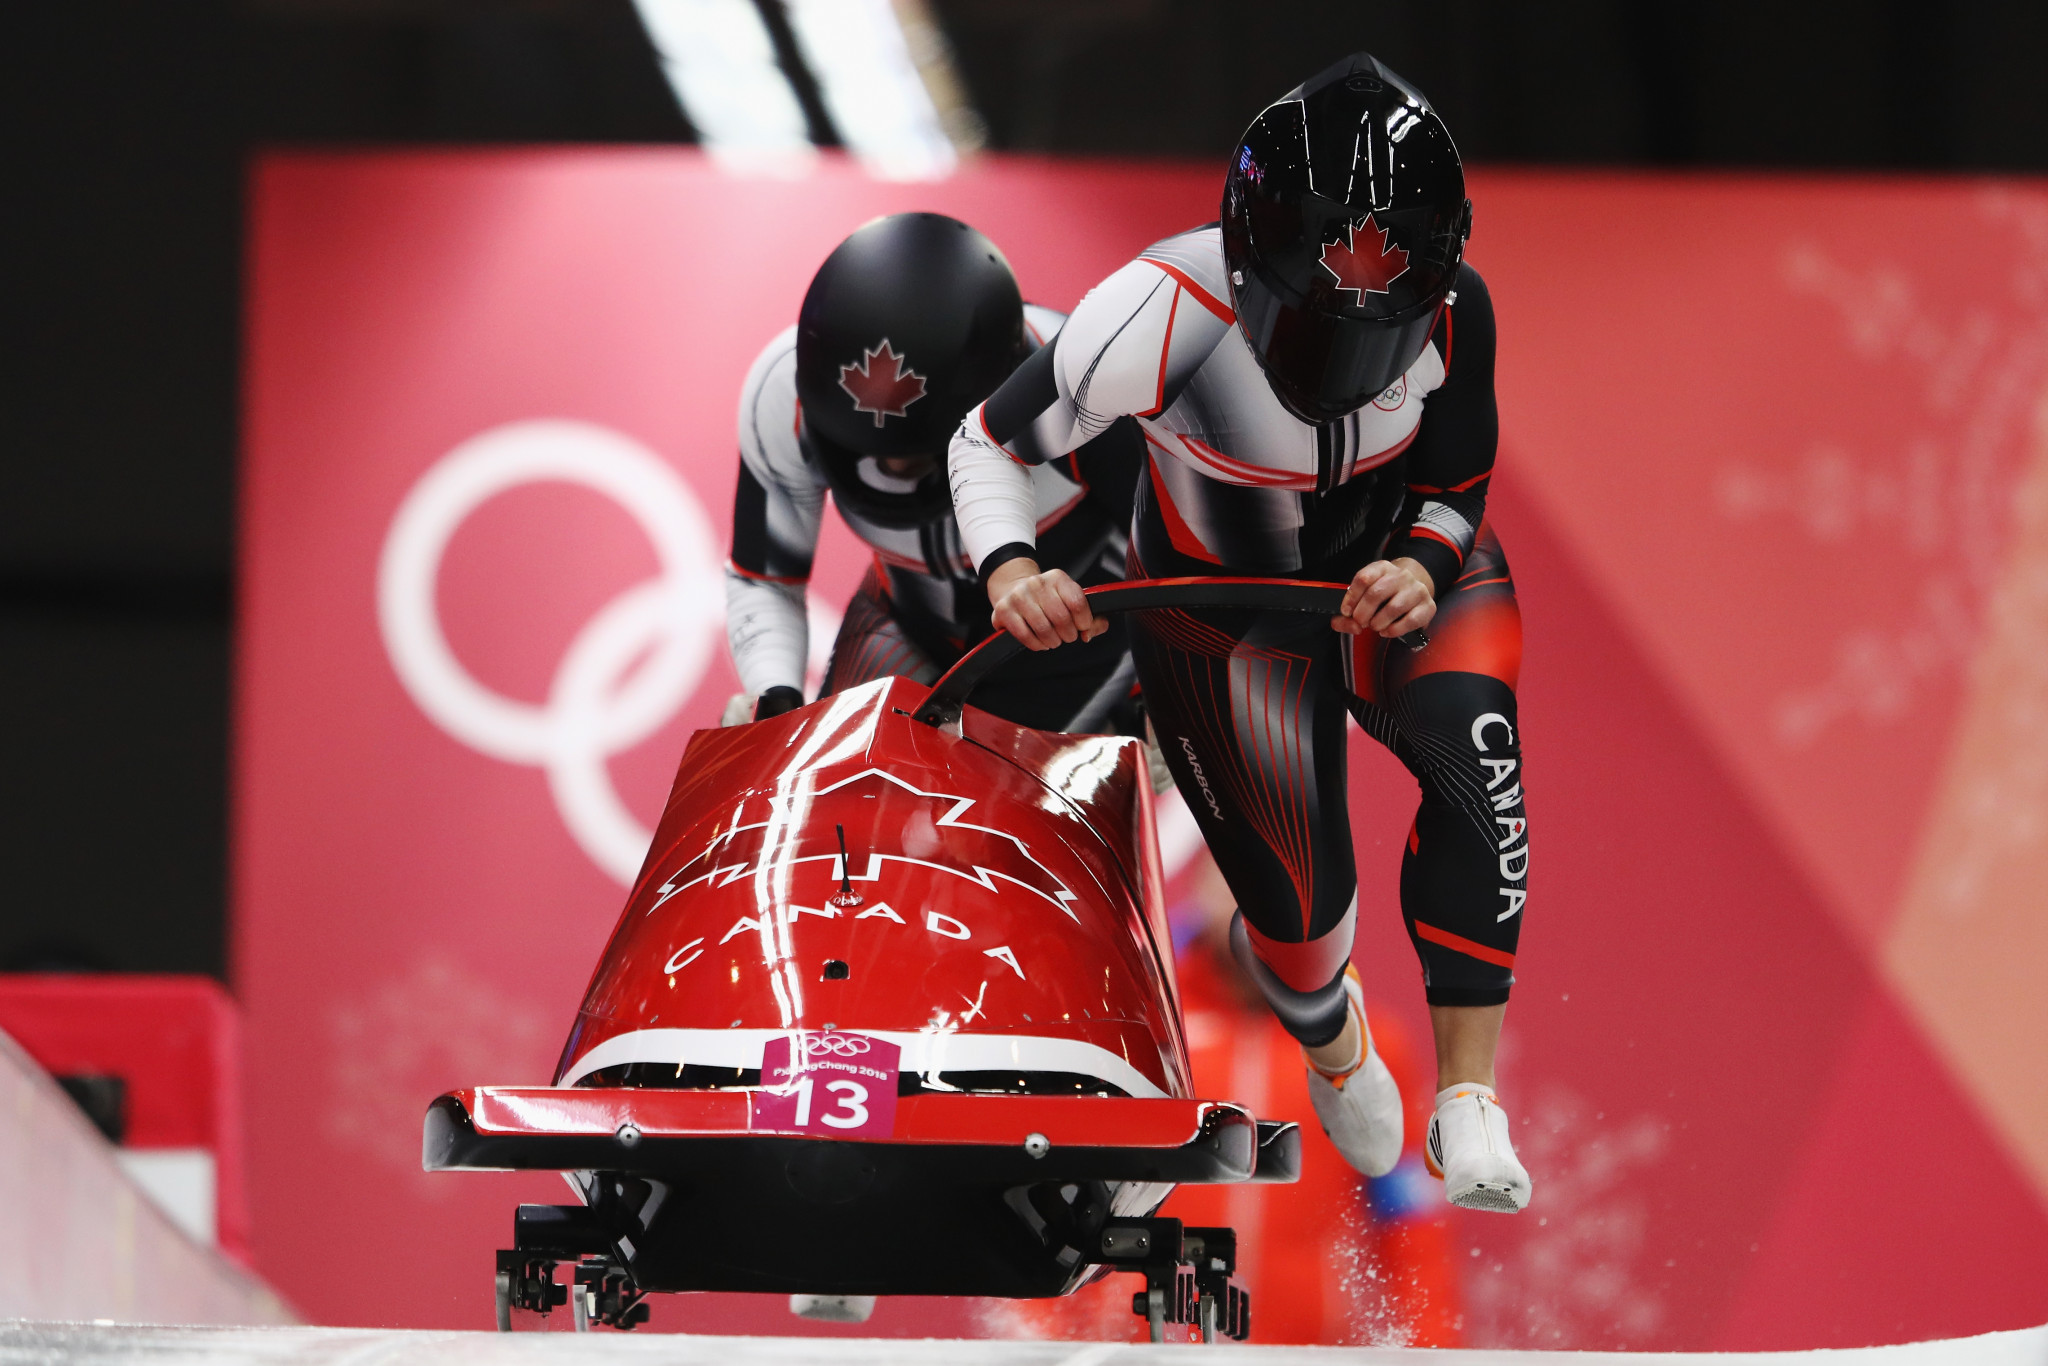 Canada's Melissa Lotholz finished seventh at the Pyeongchang 2018 Winter Olympics as a push athlete, alongside pilot Kaillie Humphries ©Getty Images